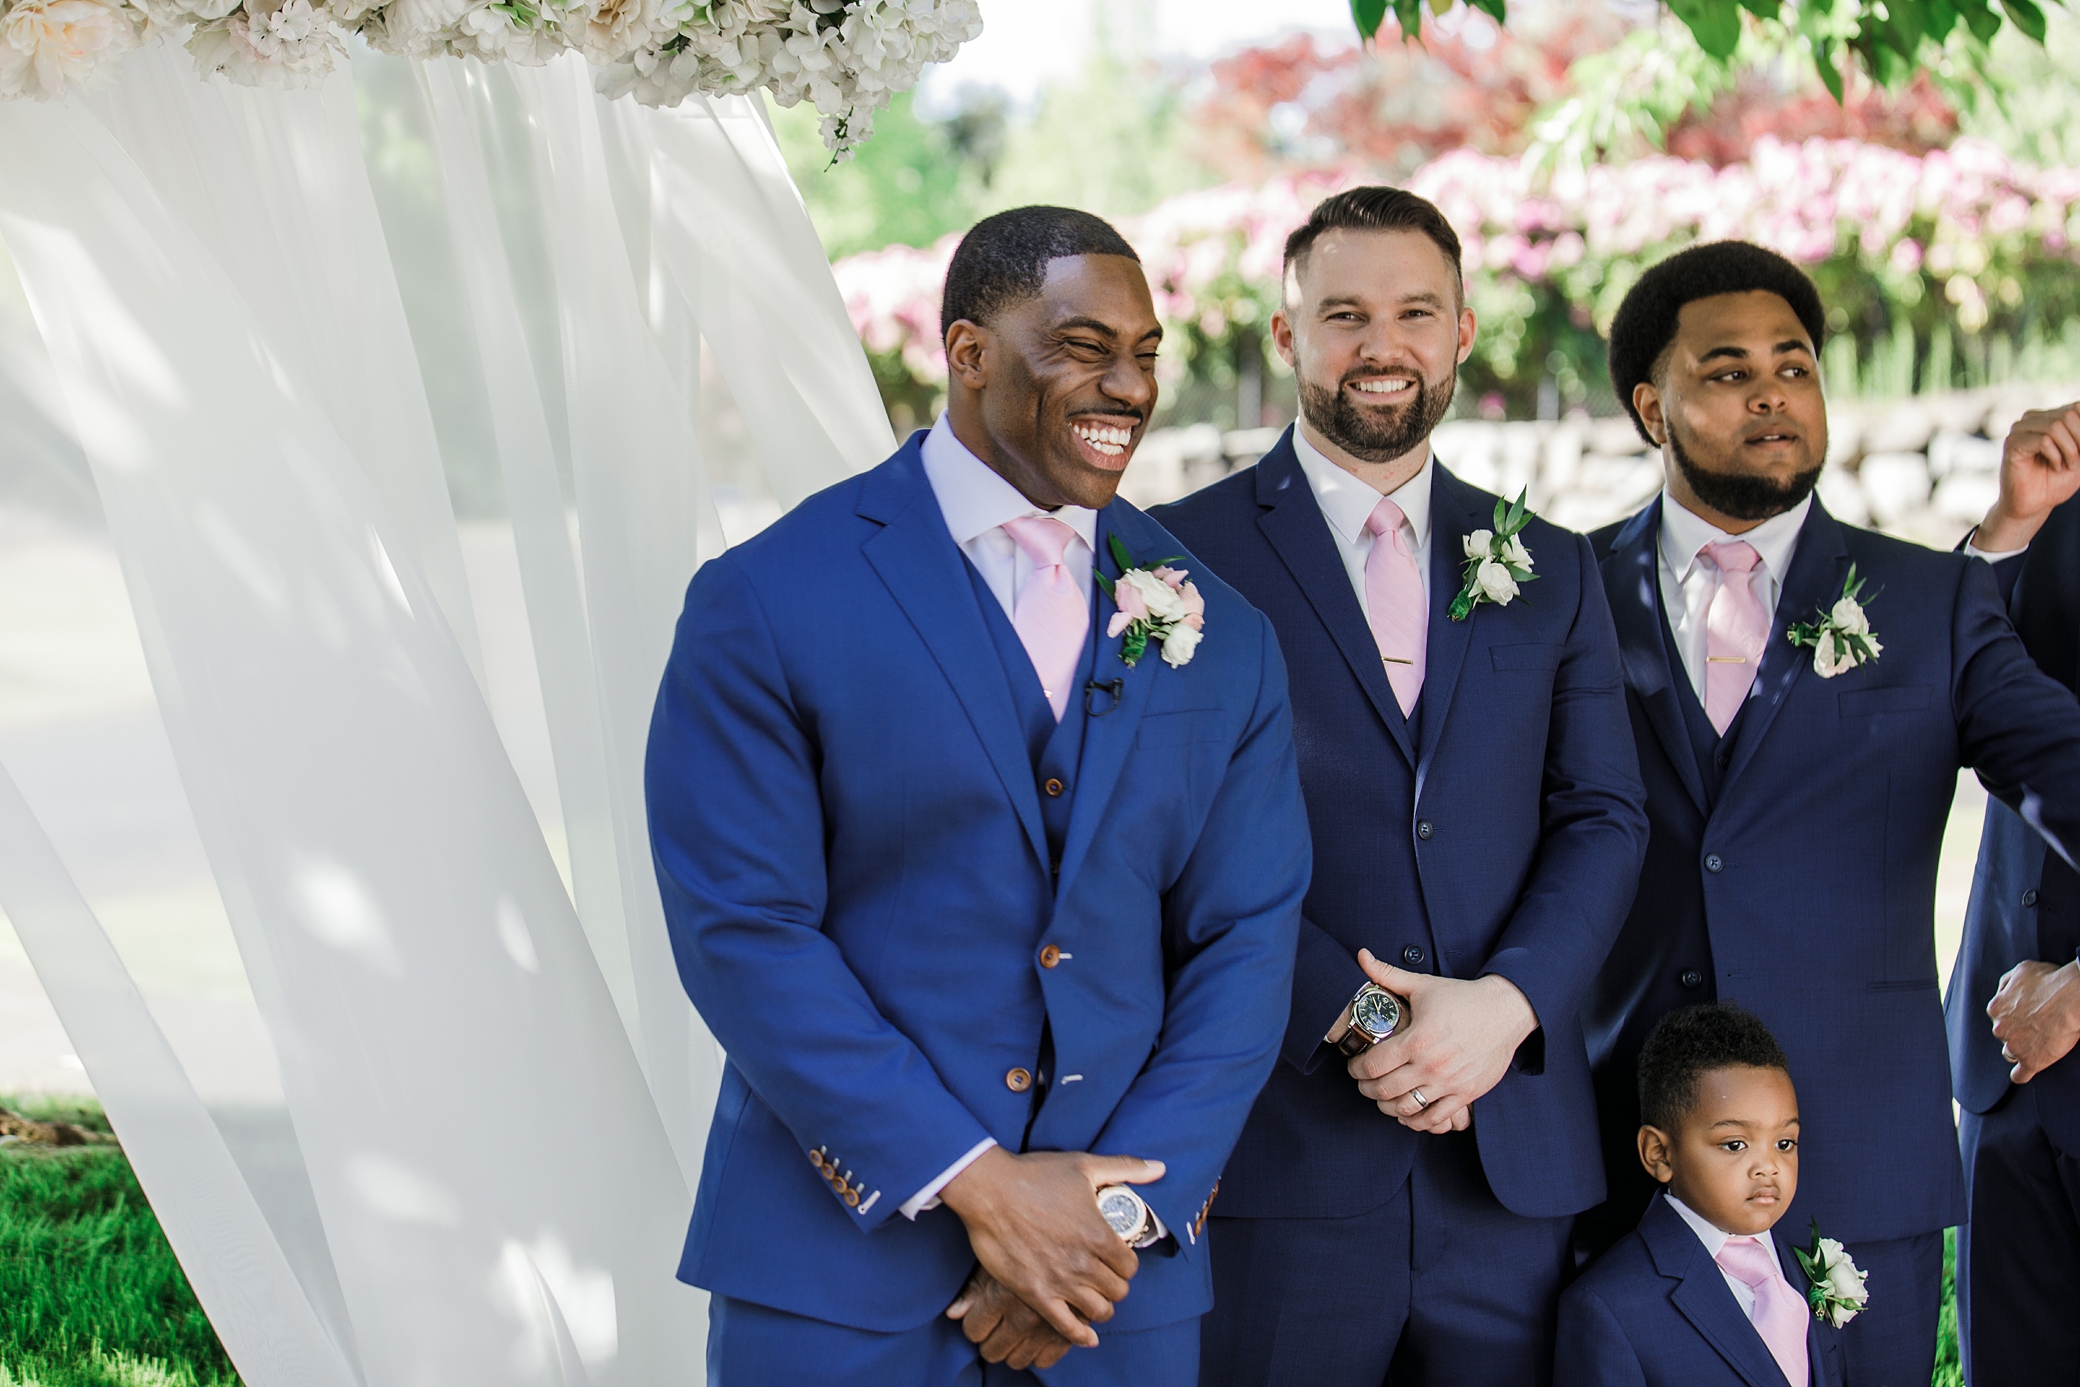 Grooms reaction to his bride walking down the aisle | Megan Montalvo Photography